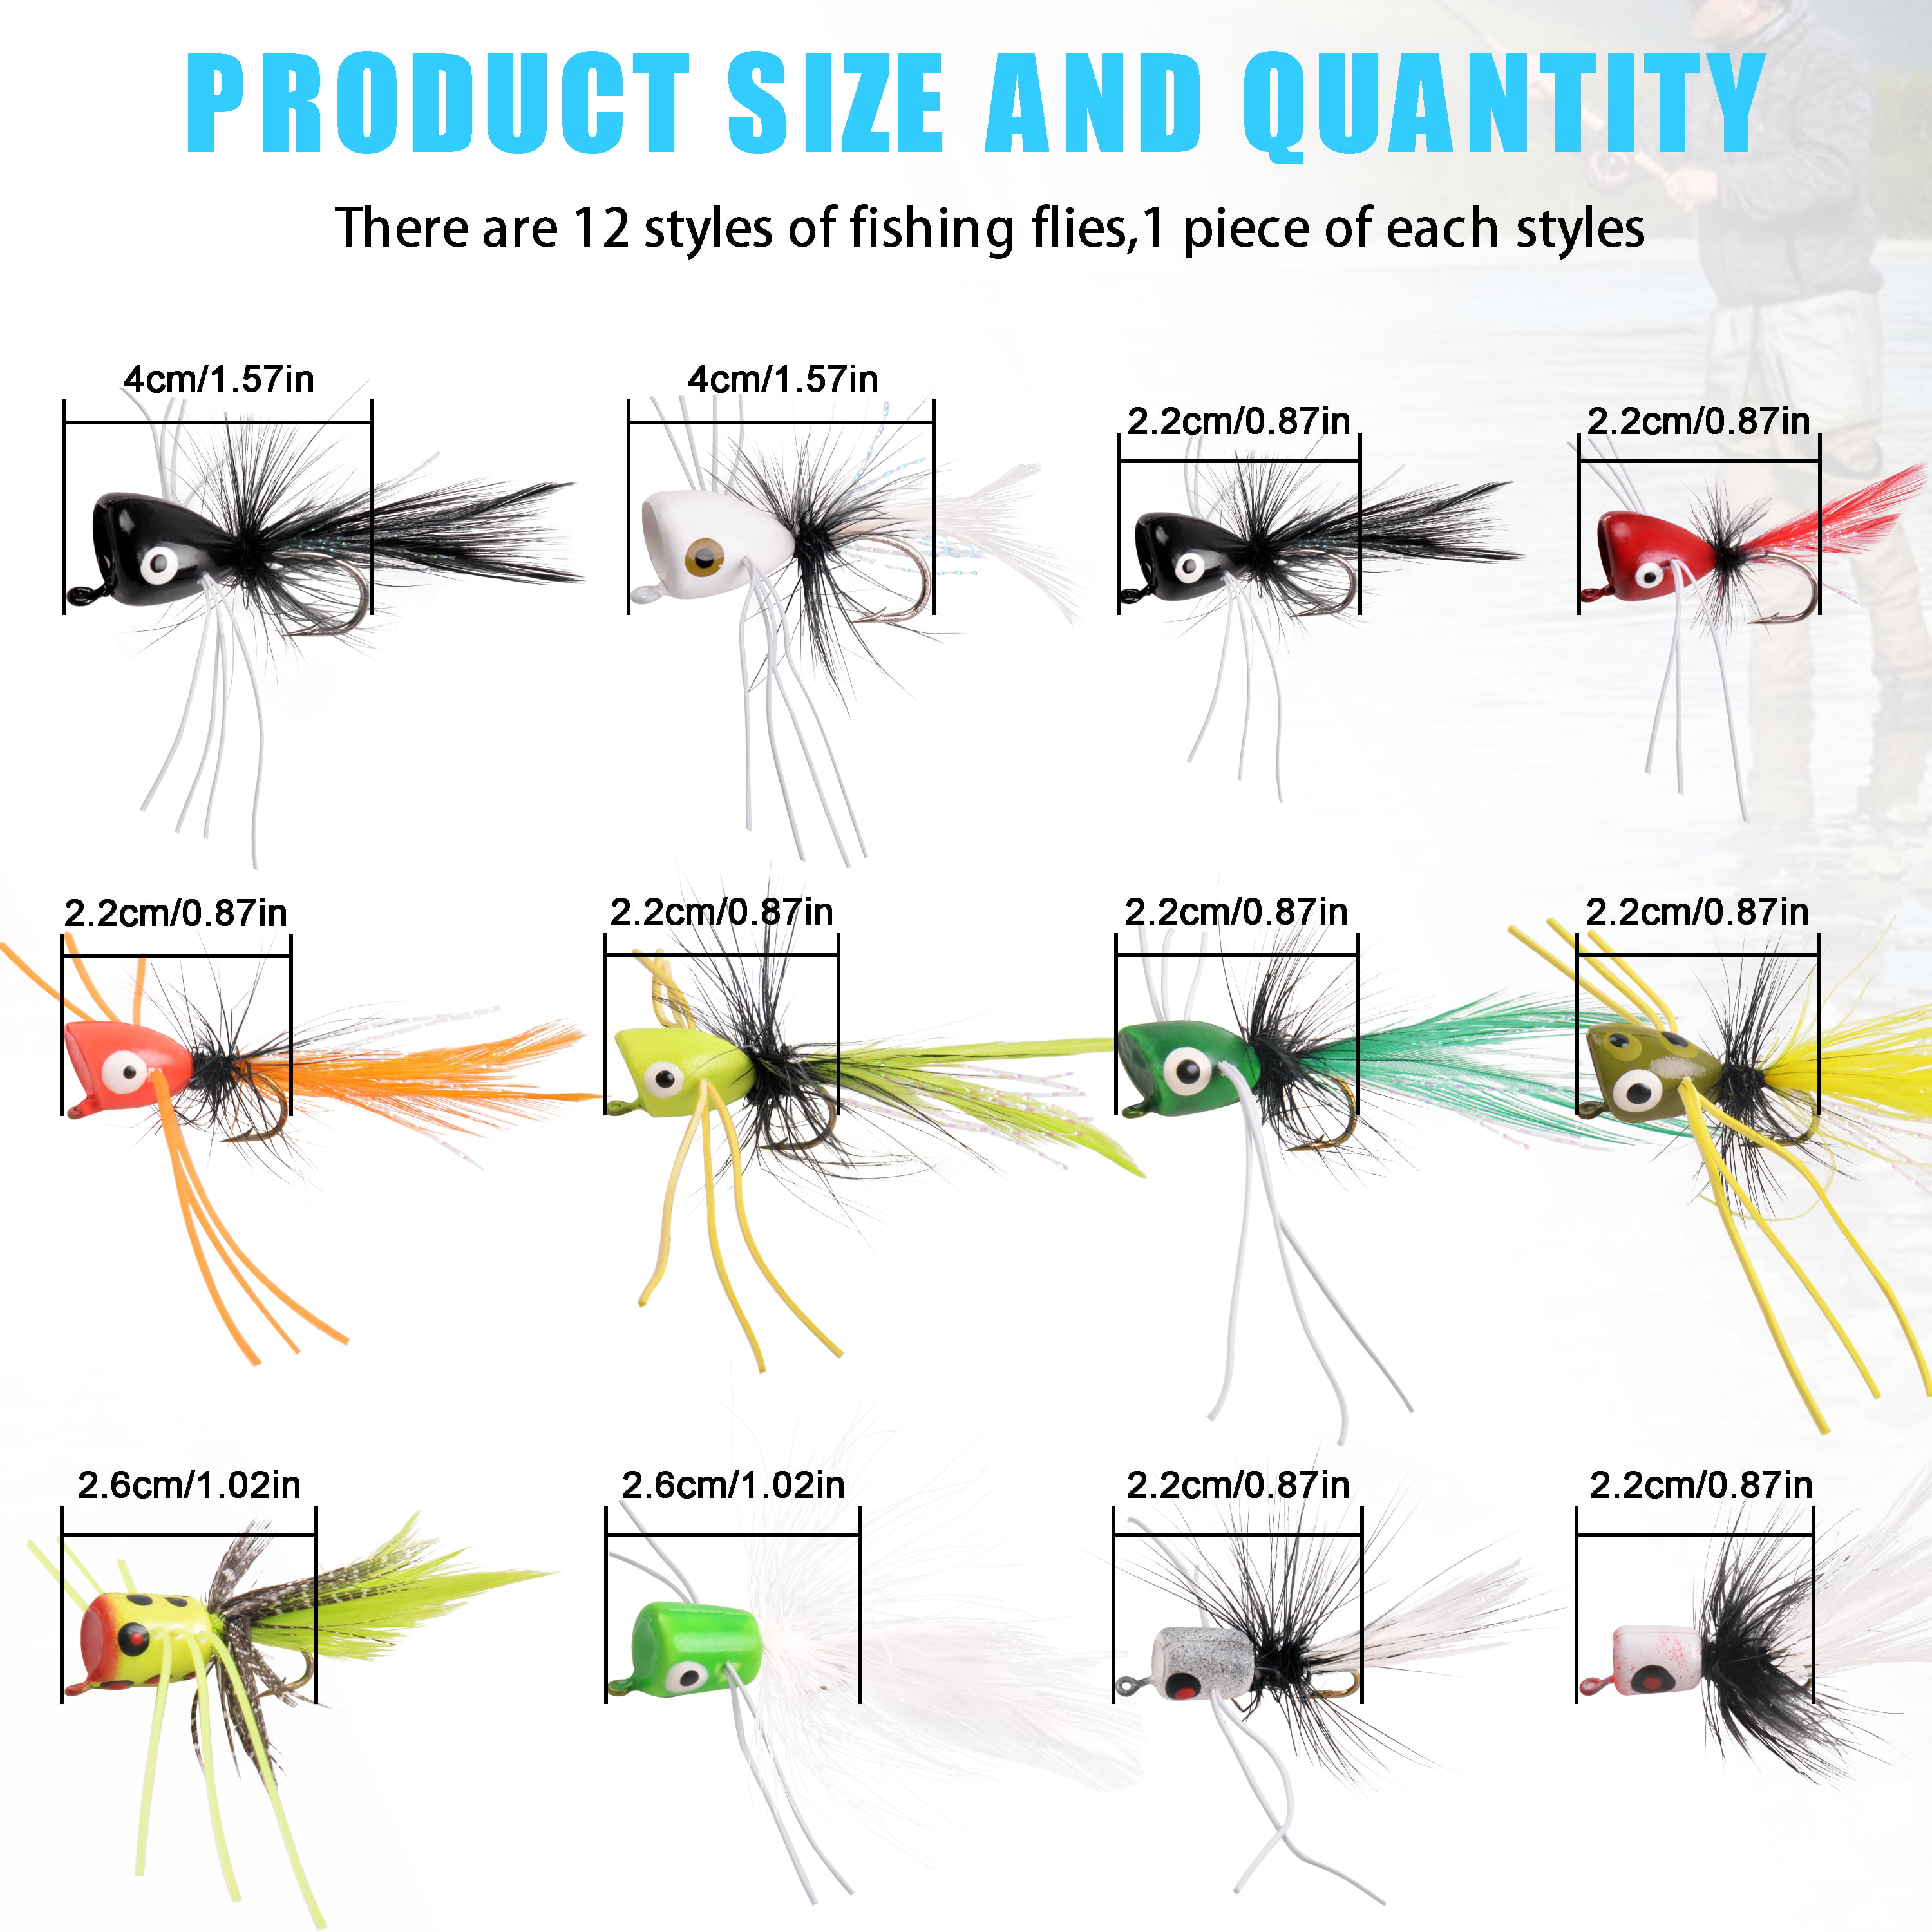 OROOTL Fly Fishing Popper Flies, 12pcs Fly Popper Lures Bass